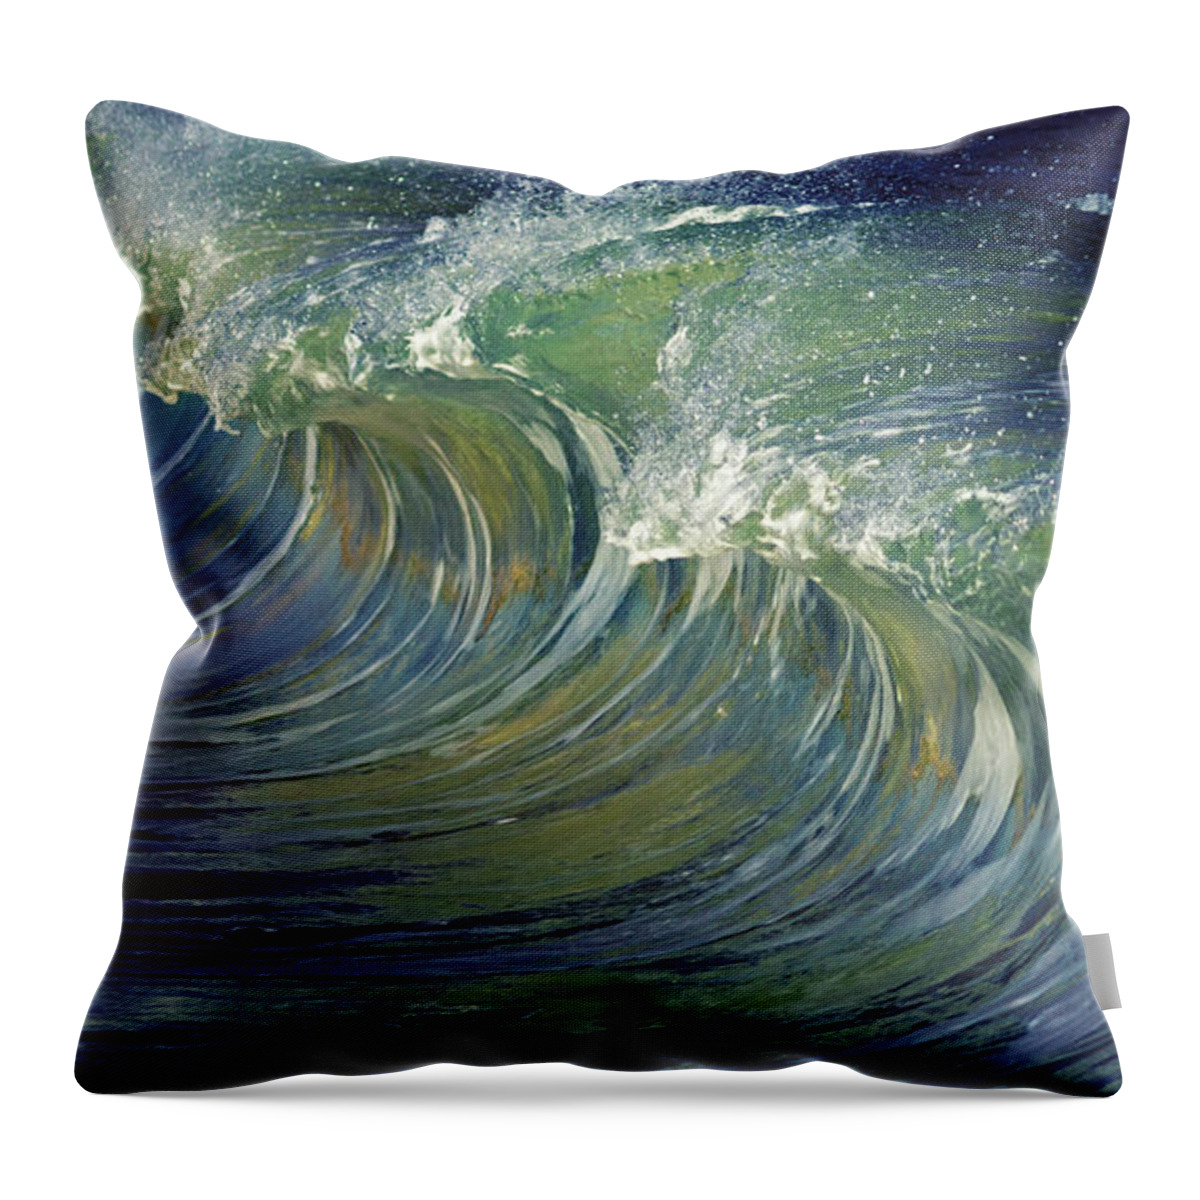 Yellow Throw Pillow featuring the photograph Lost Heartbeat by Stelios Kleanthous